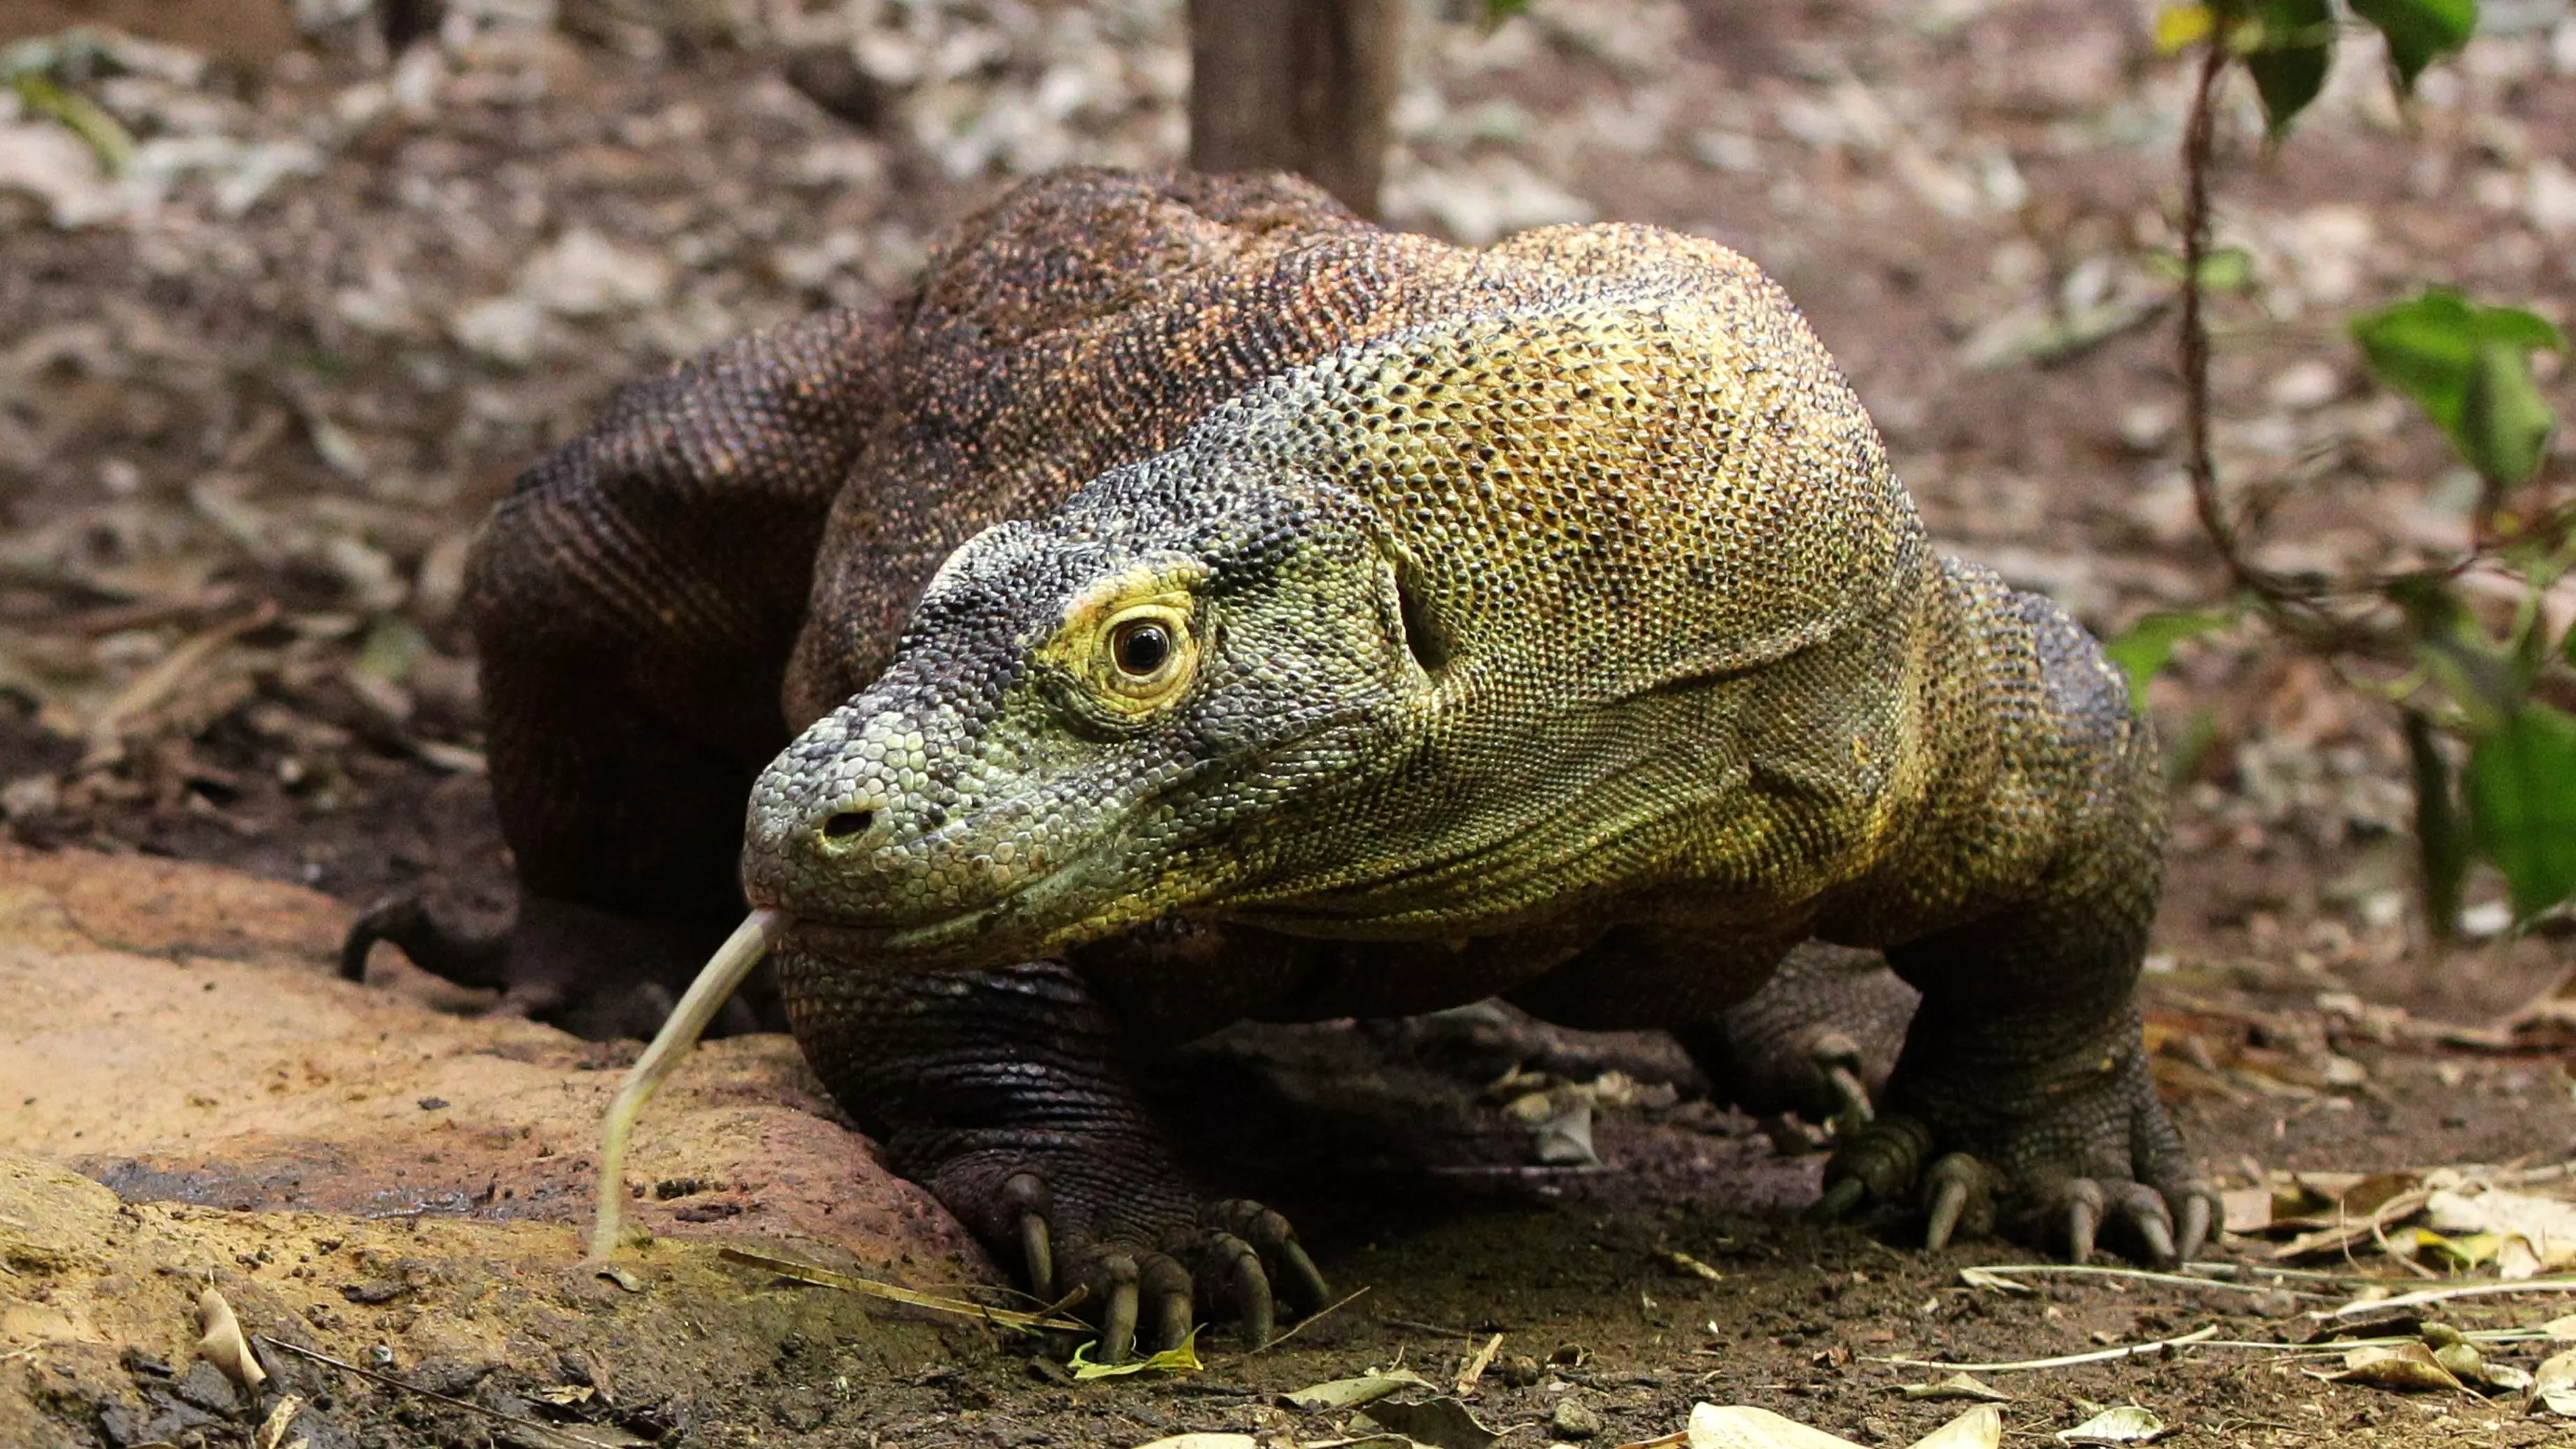 Indonesian Governor Suggests Genetically Engineering Komodo Dragons To Make Them Bigger 